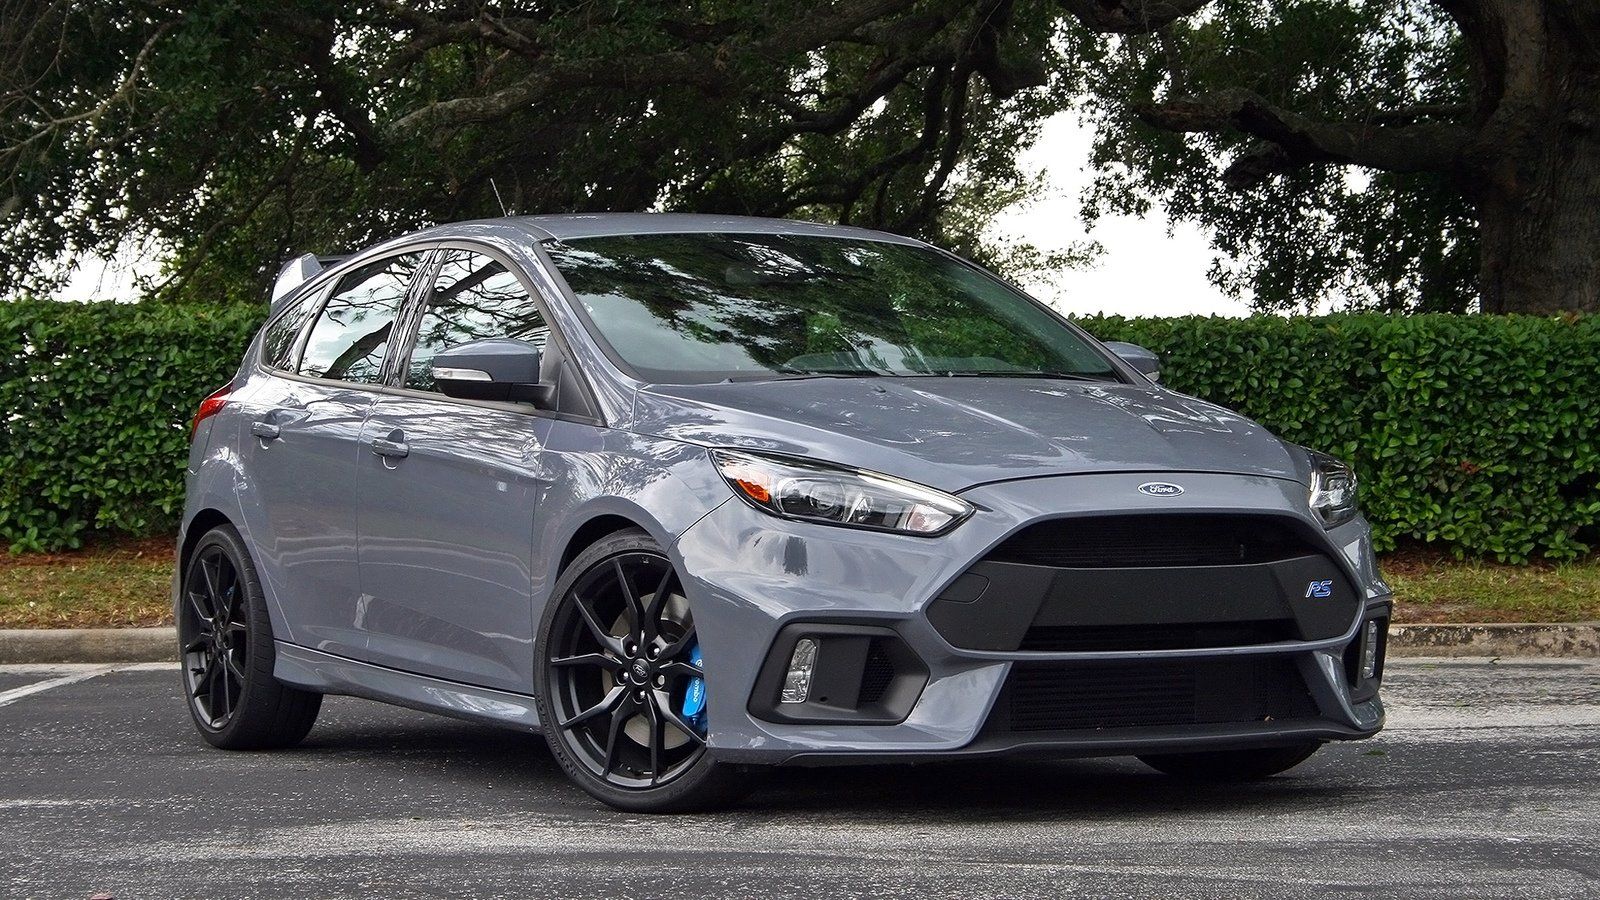 The Ford Focus RS As We Know It is Dead